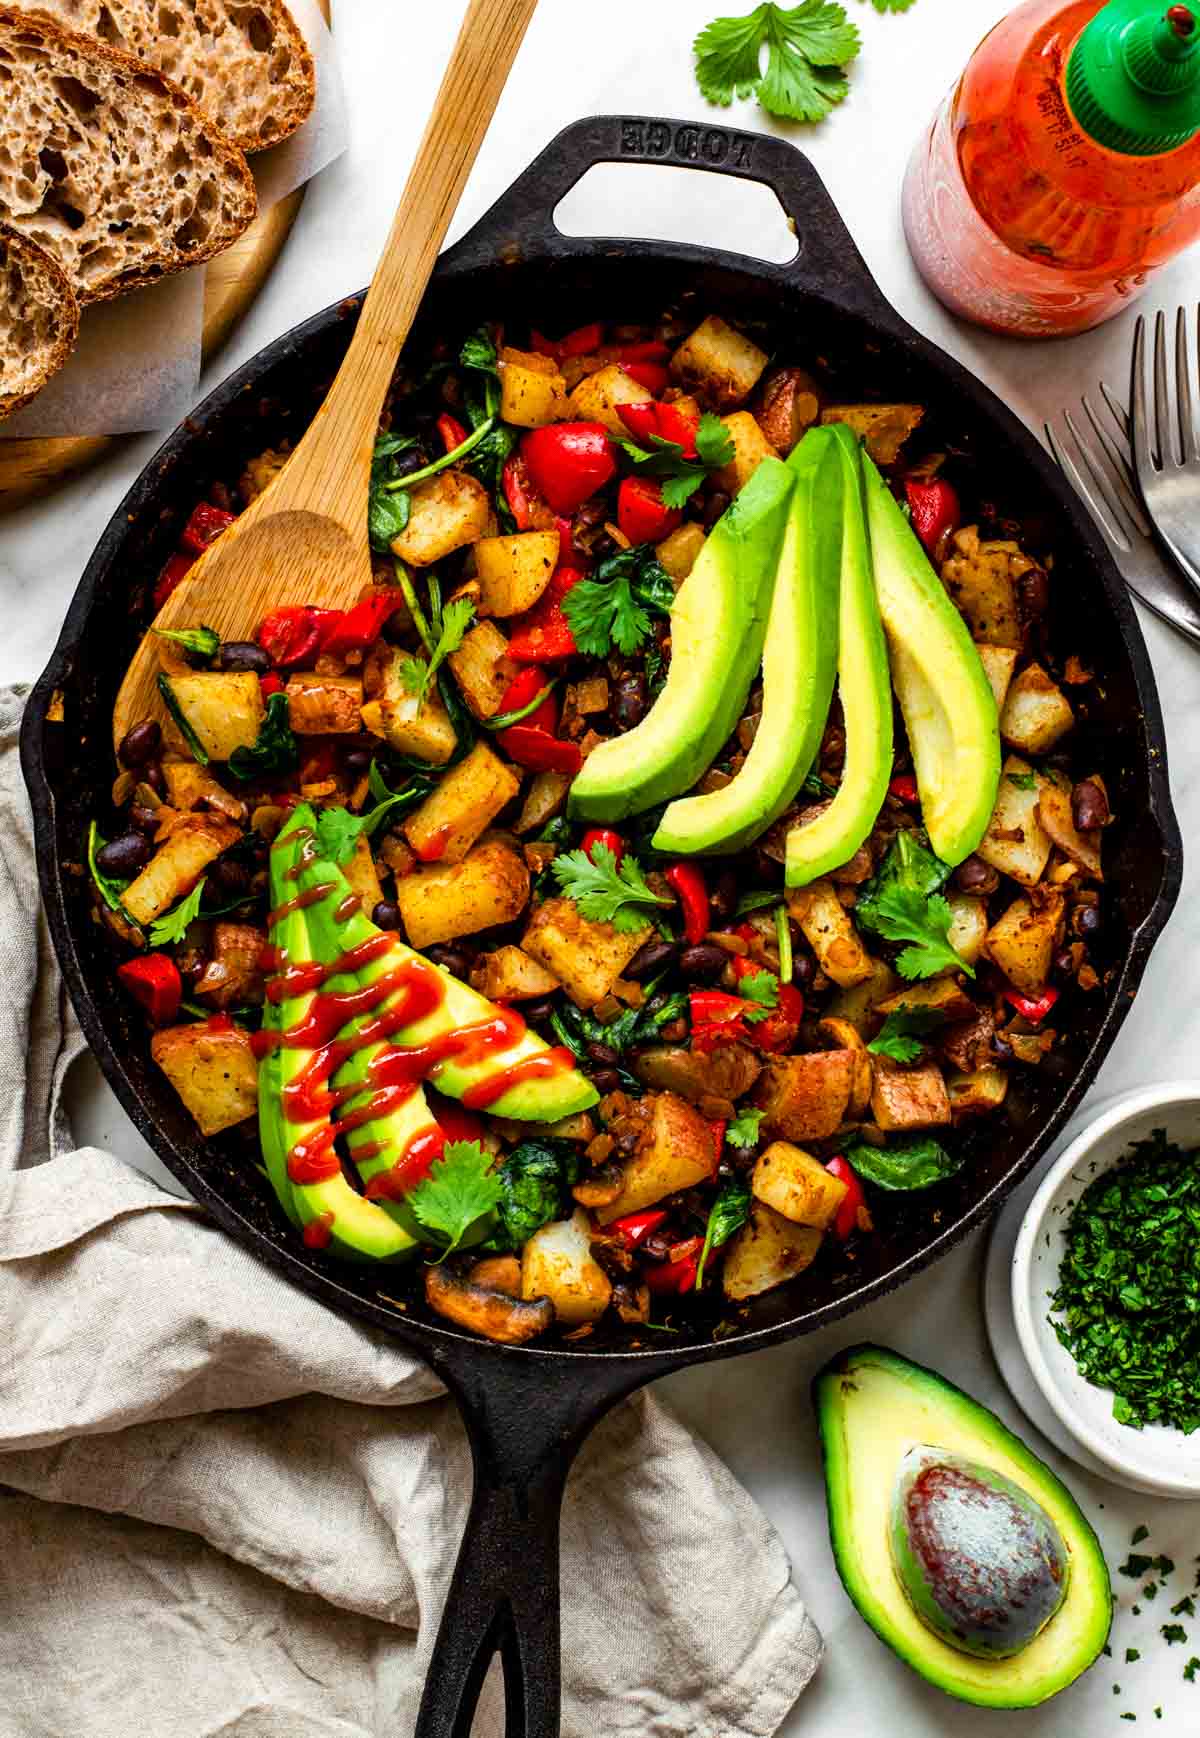 Vegetable hash in a cast iron skillet, topped with avocado slices, fresh cilantro leaves, and a drizzle of hot sauce.